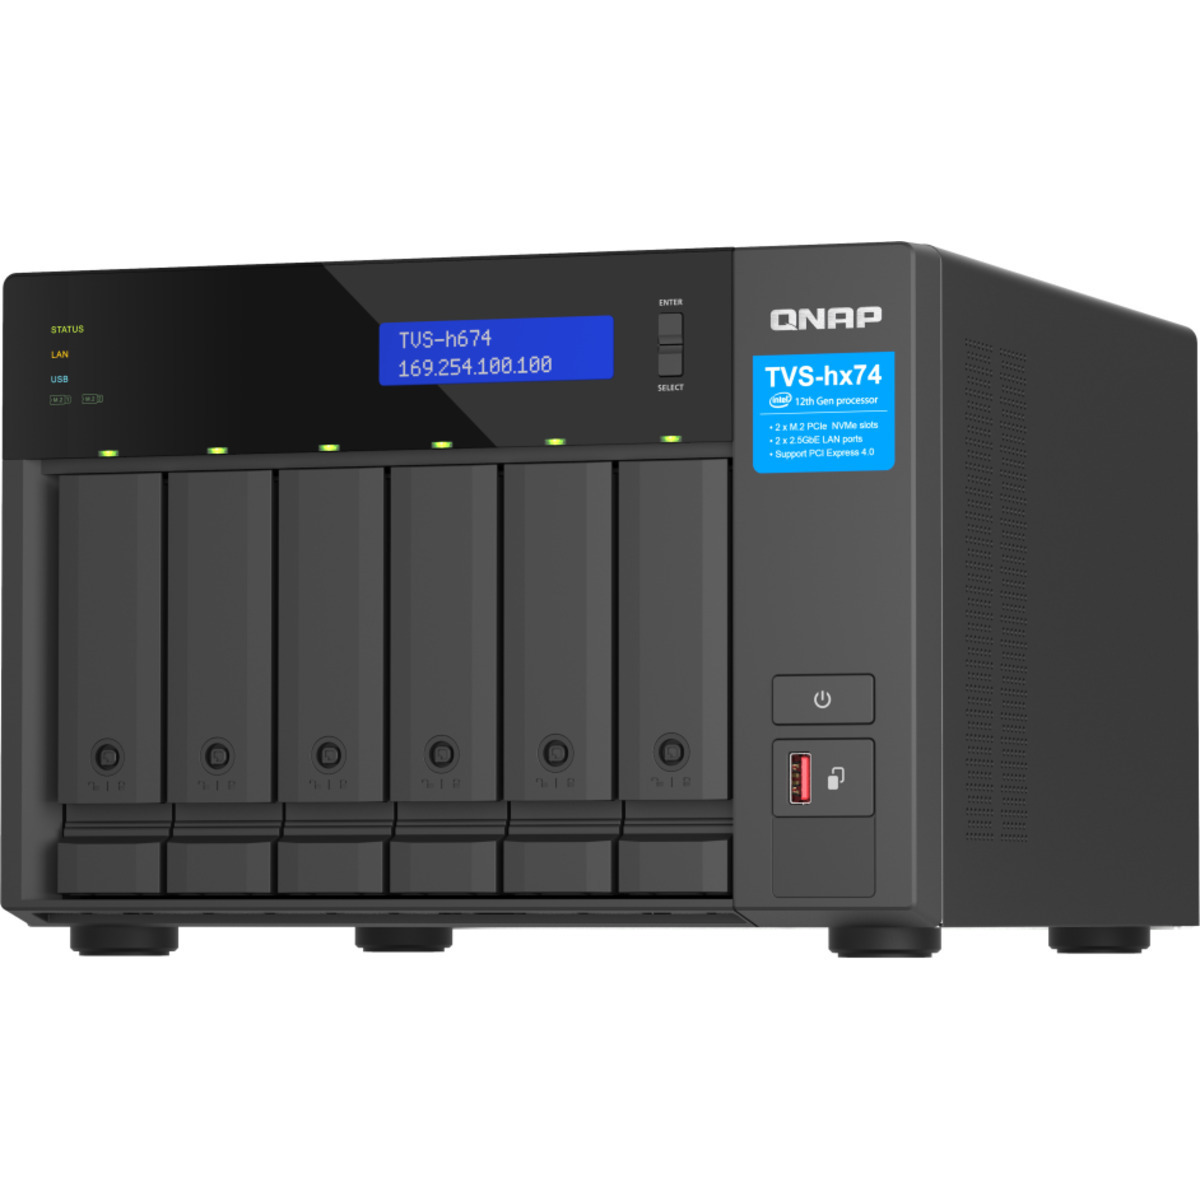 buy $5617 QNAP TVS-h674 Core i5 132tb Desktop NAS - Network Attached Storage Device 6x22000gb Seagate IronWolf Pro ST22000NT001 3.5 7200rpm SATA 6Gb/s HDD NAS Class Drives Installed - Burn-In Tested - nas headquarters buy network attached storage server device das new raid-5 free shipping simply usa TVS-h674 Core i5